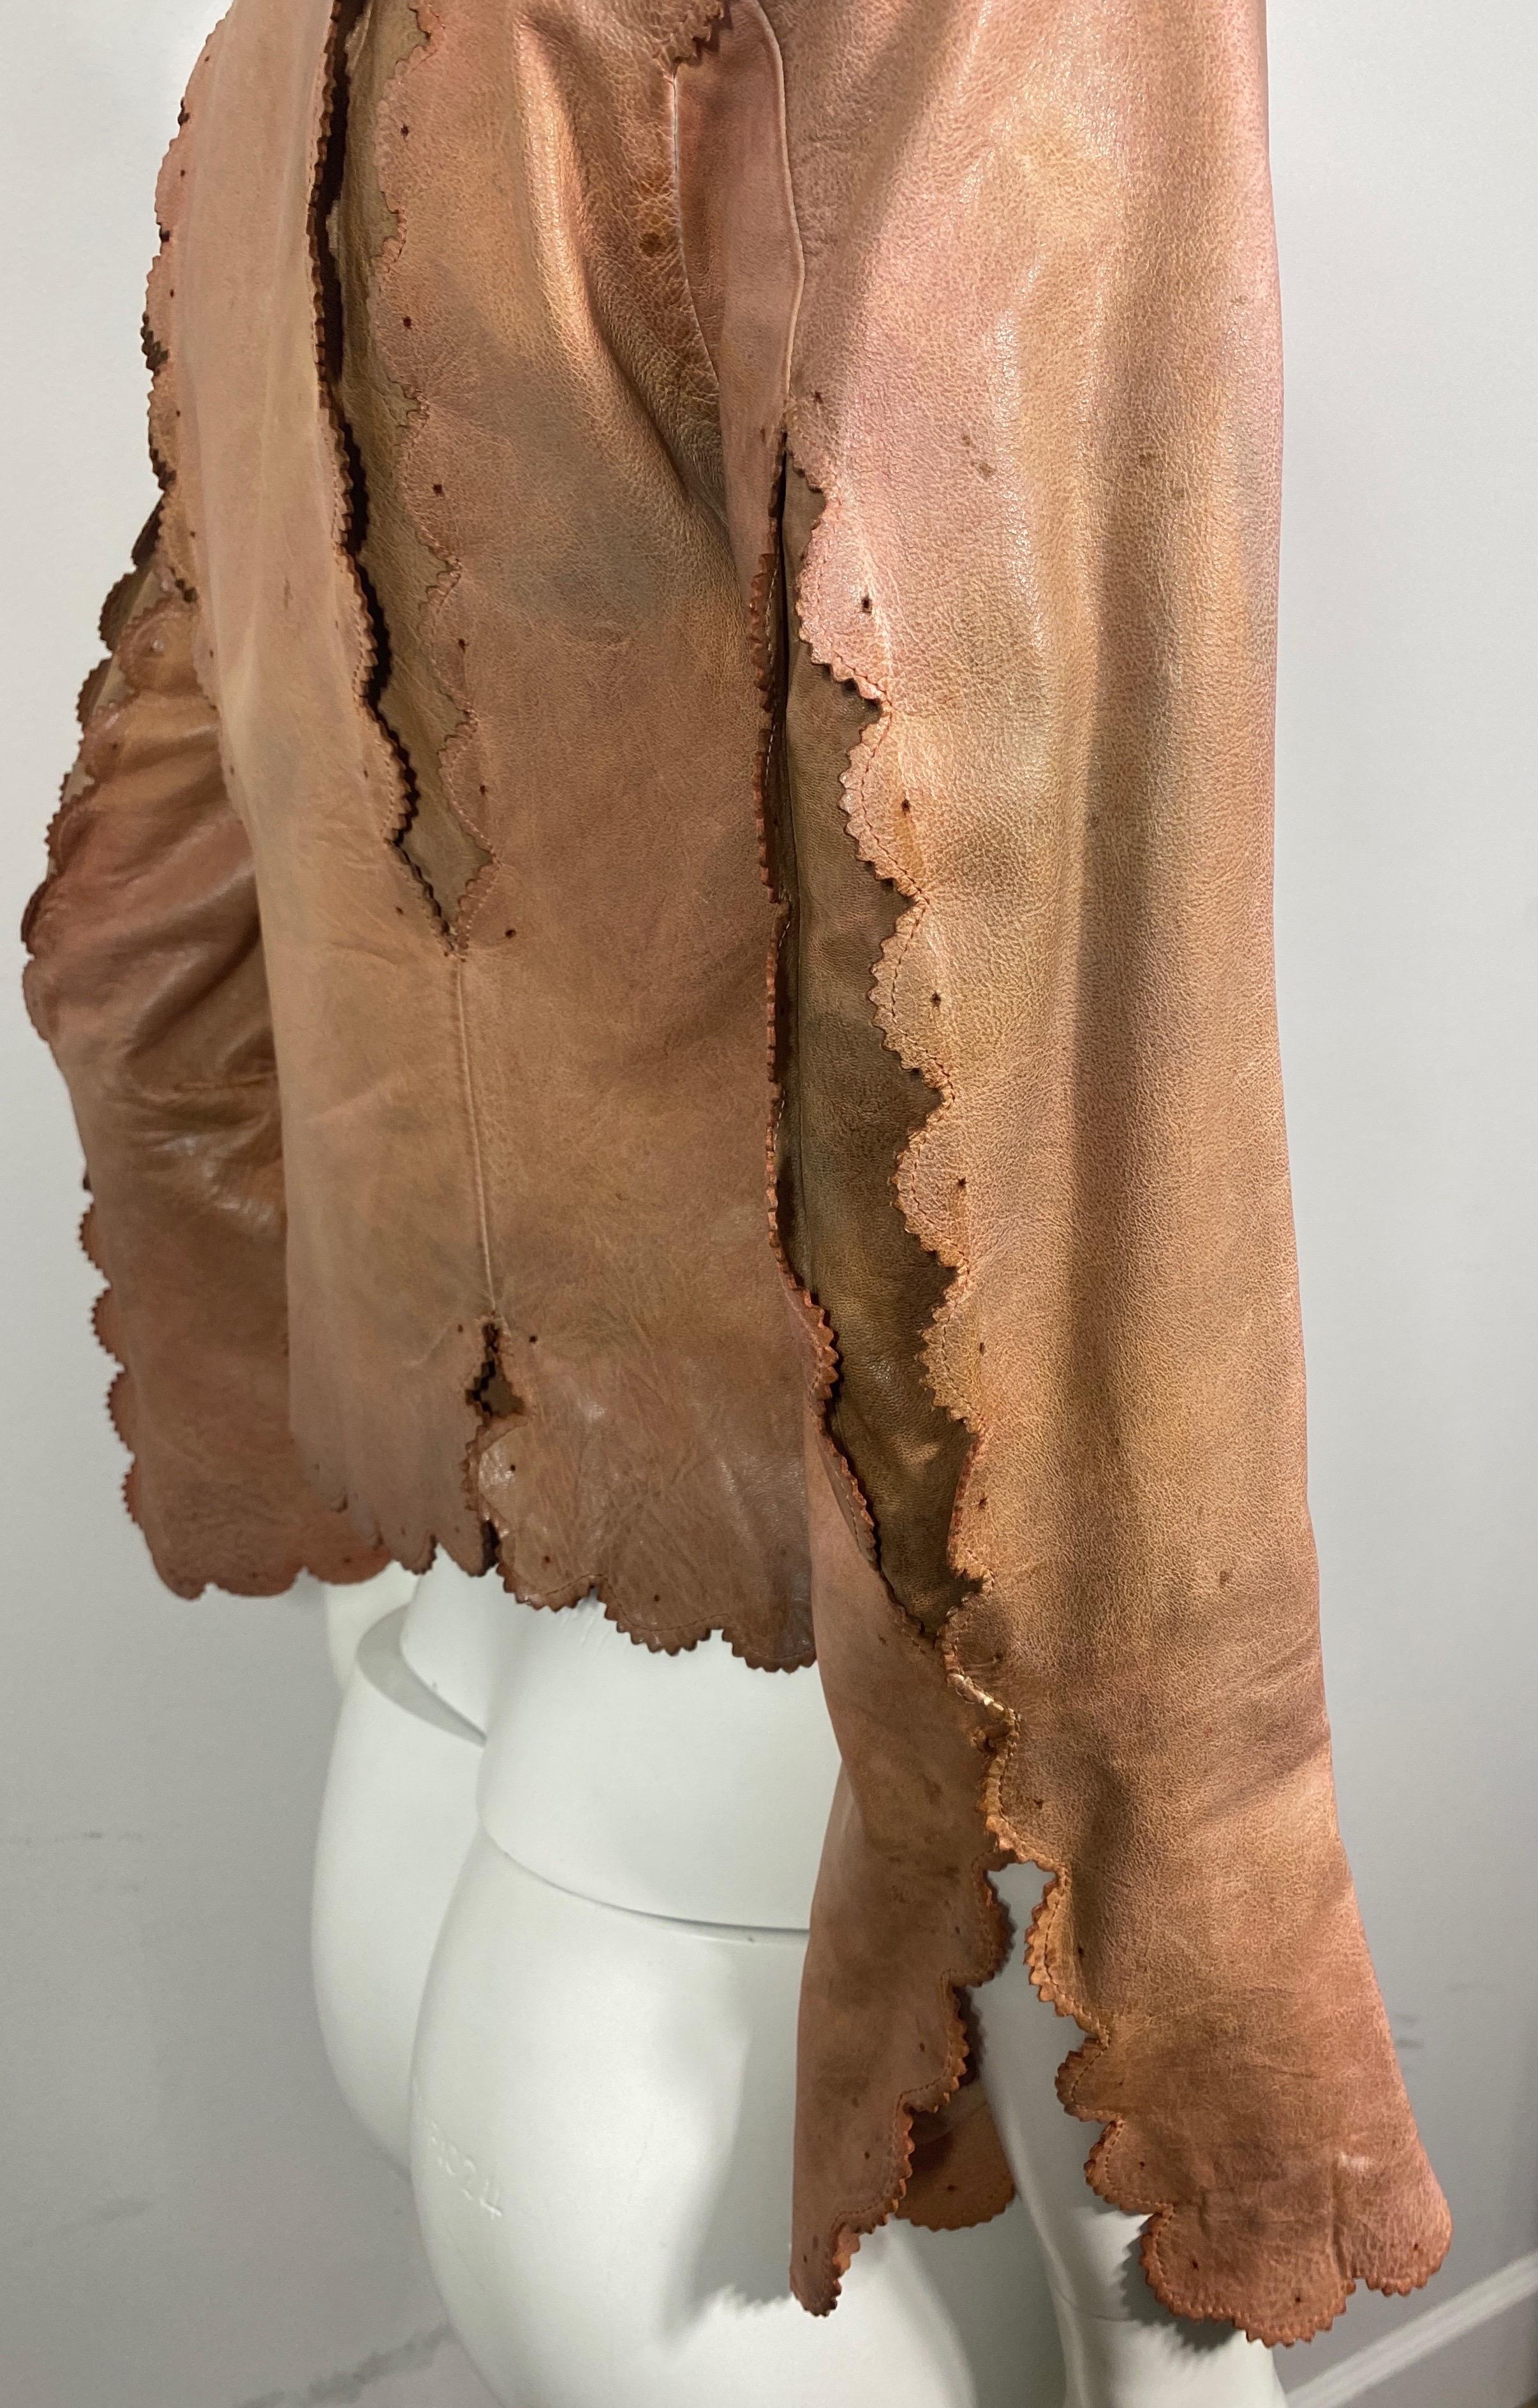 Alexander McQueen Dark Nude Distressed Leather Jacket-Size 40 For Sale 3